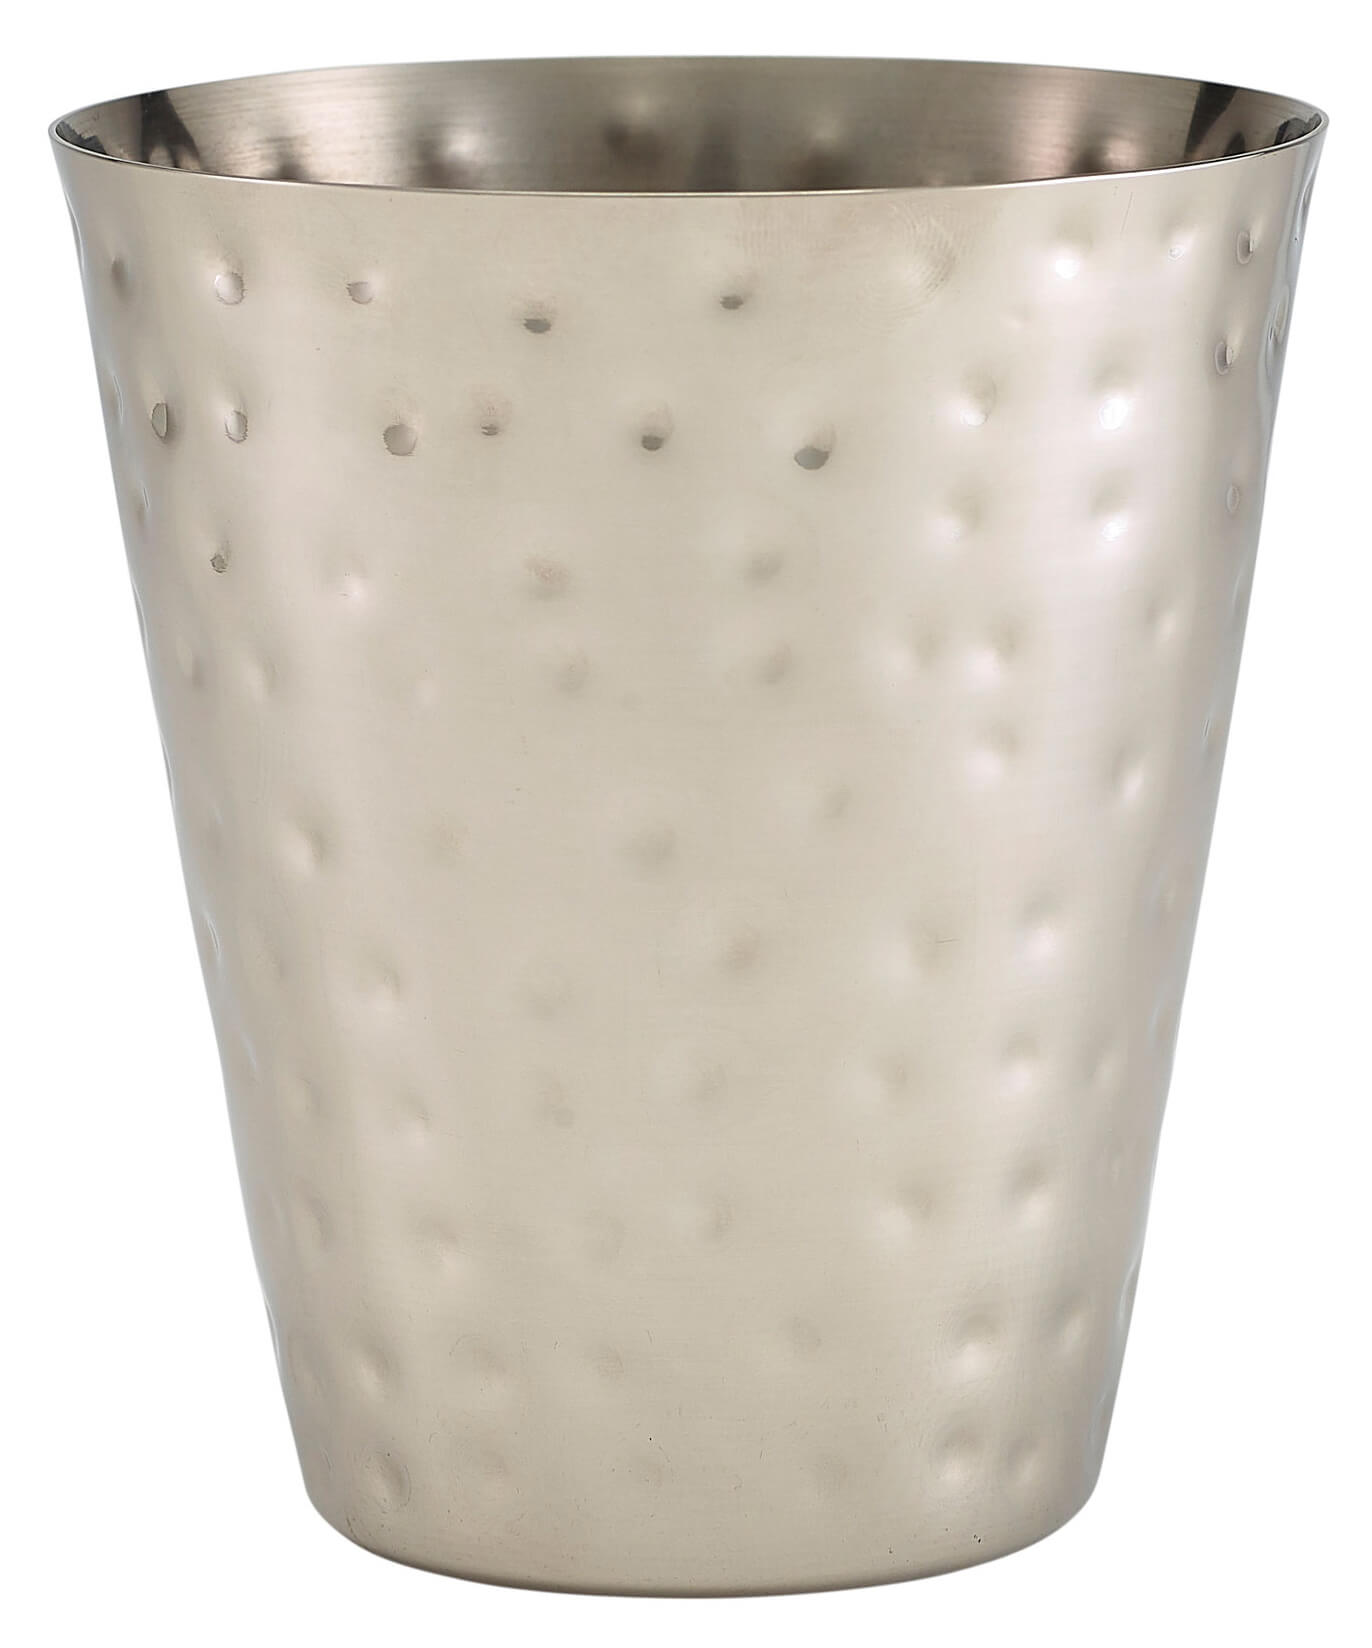 Stainless steel cup, hammered polished - 410ml